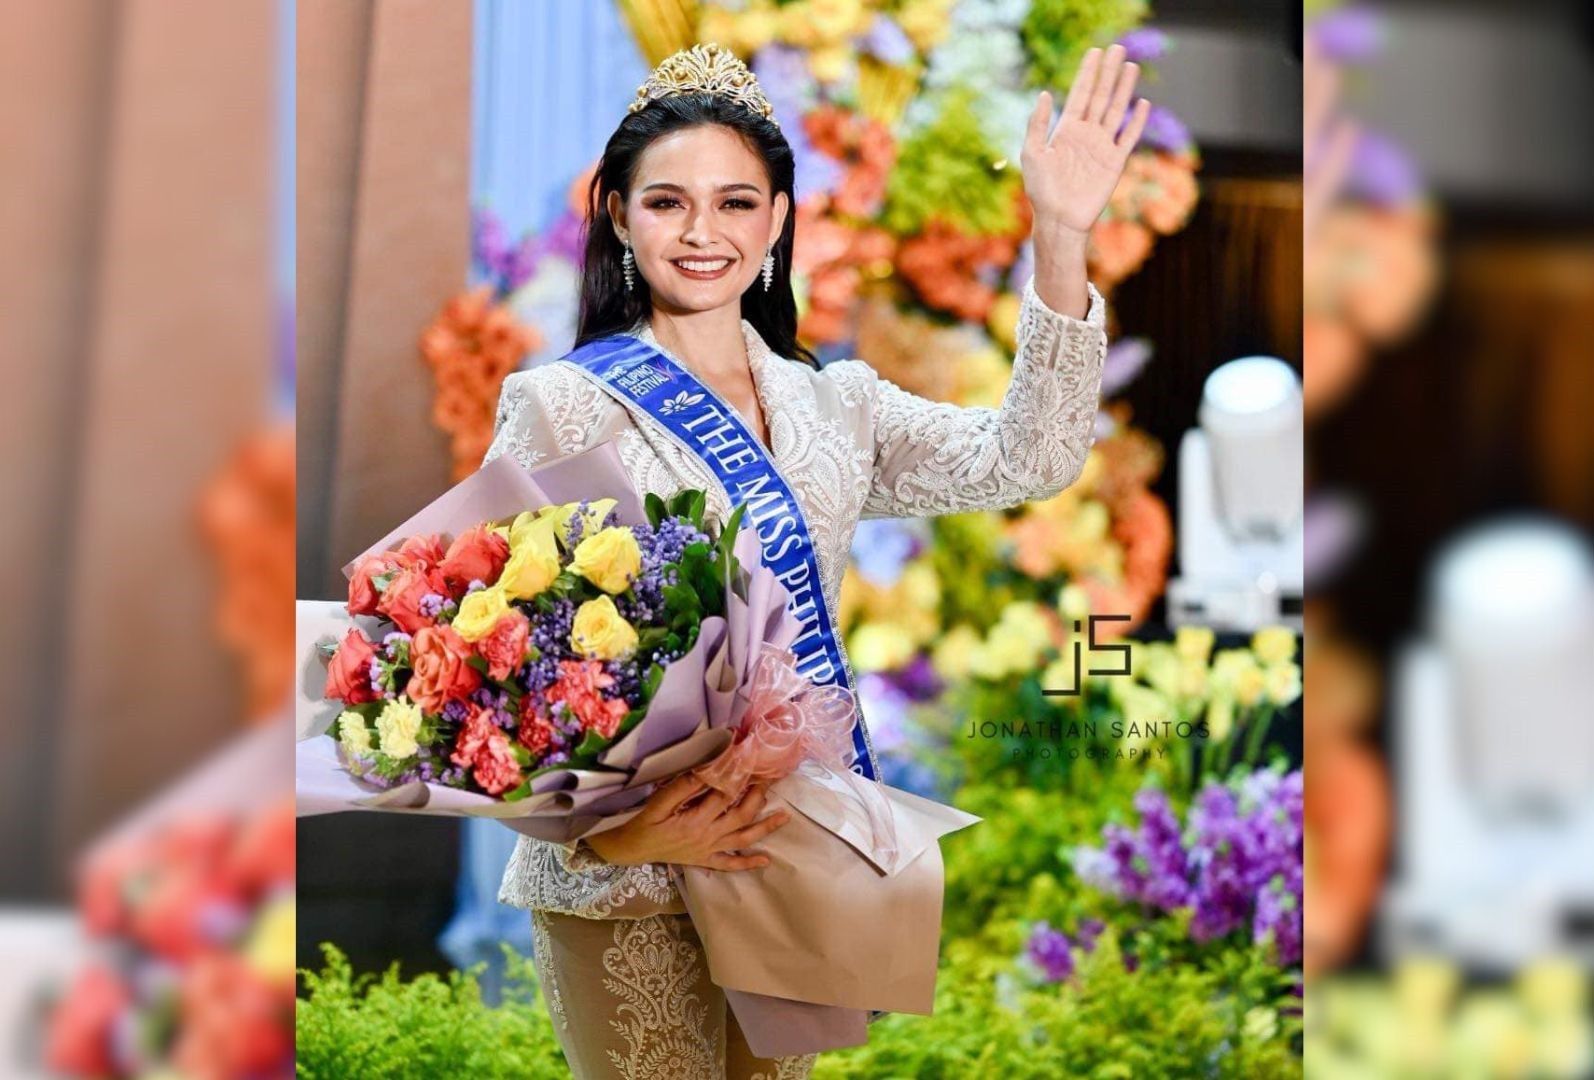 'Pageantry reinvented': The Miss Philippines adopts new pageant format, extends application period